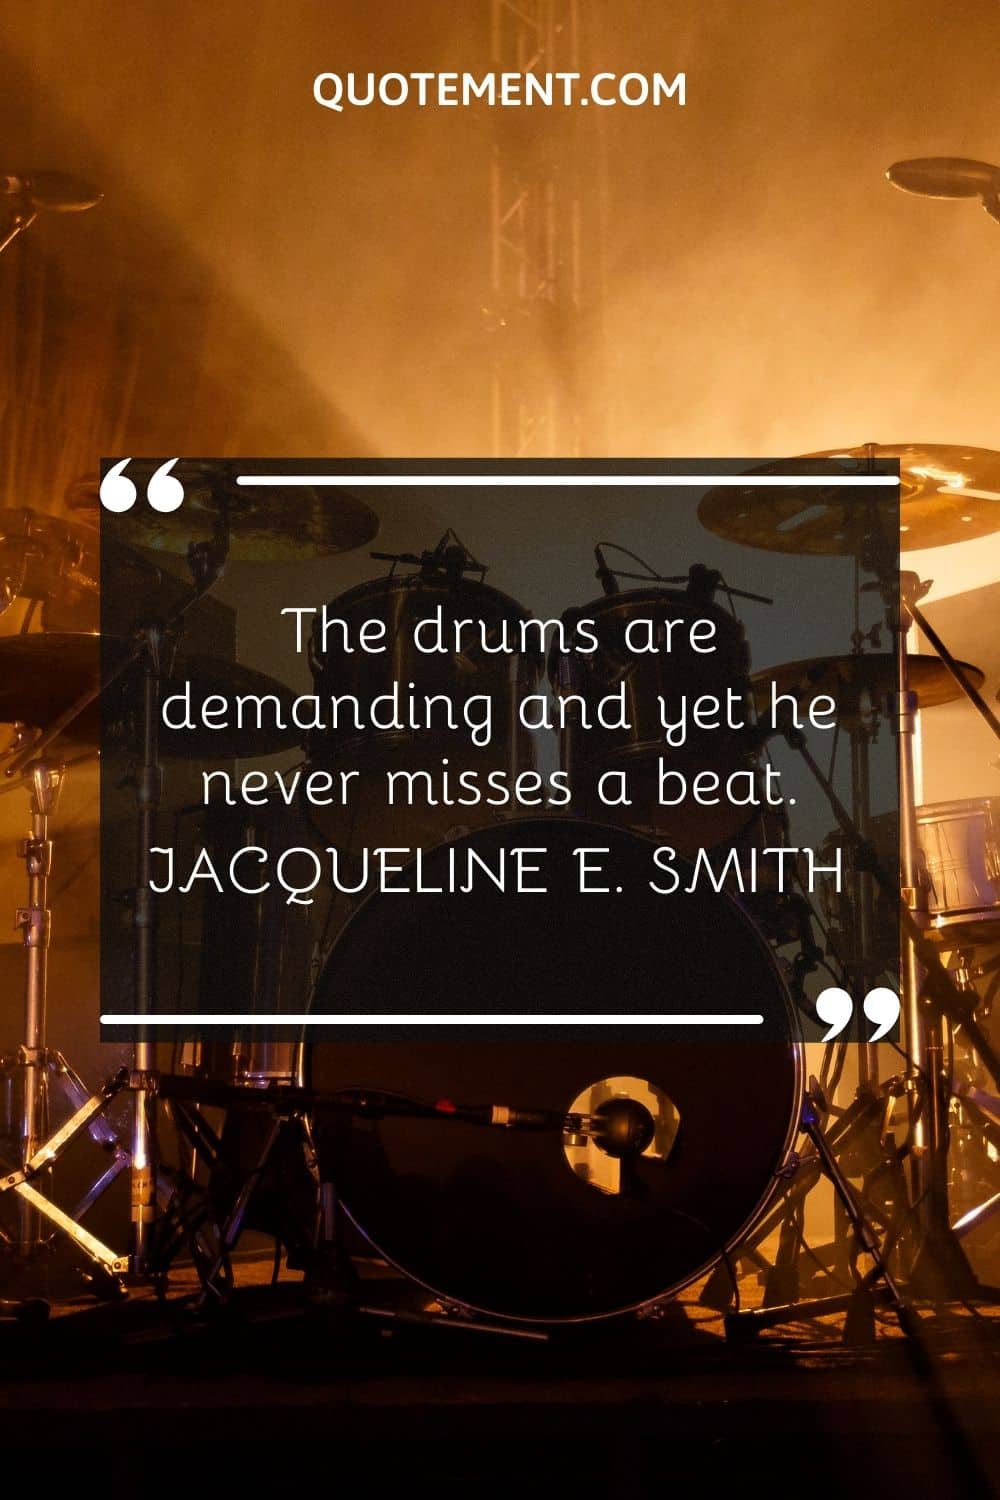 The drums are demanding and yet he never misses a beat